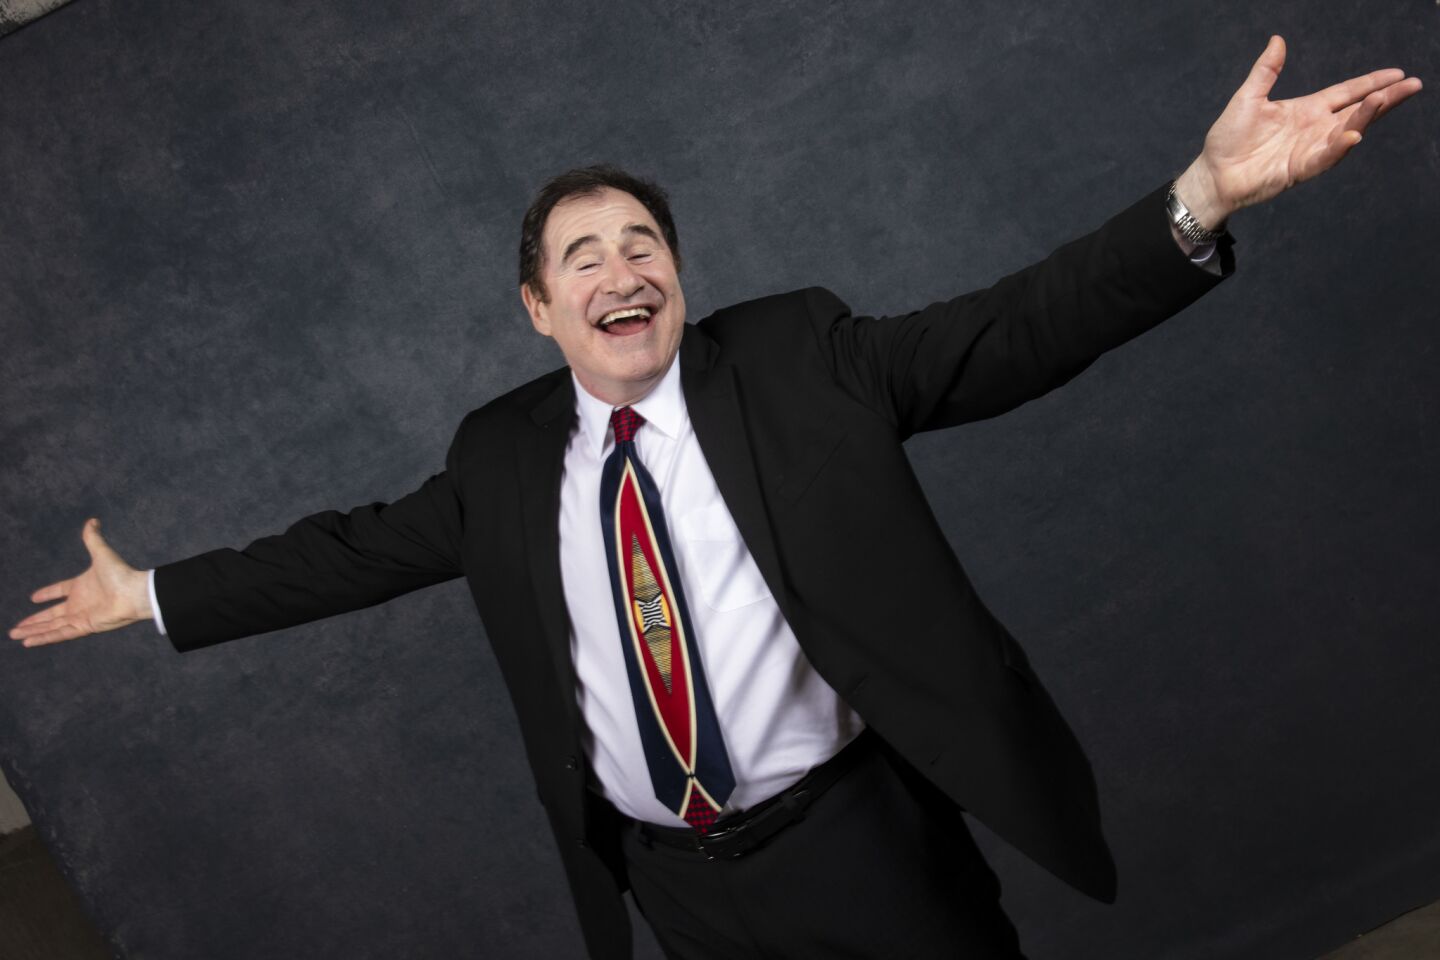 Actor Richard Kind from the television series "IFC's Documentary Now!"